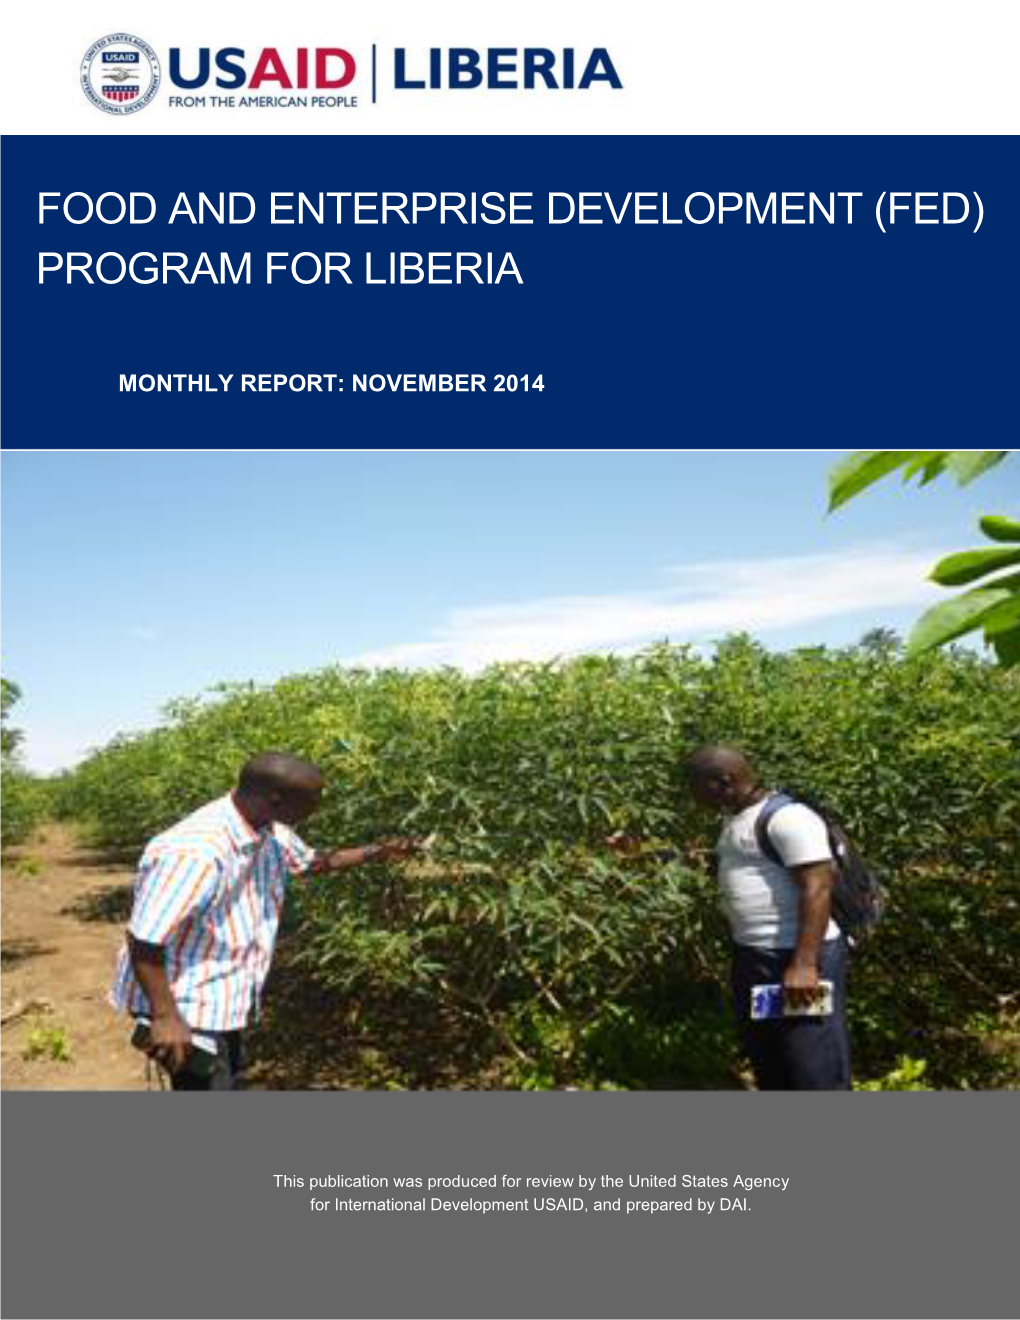 Food and Enterprise Development (FED) Program for Liberia Is a USAID-Funded Development Program That Was Launched in September 2011